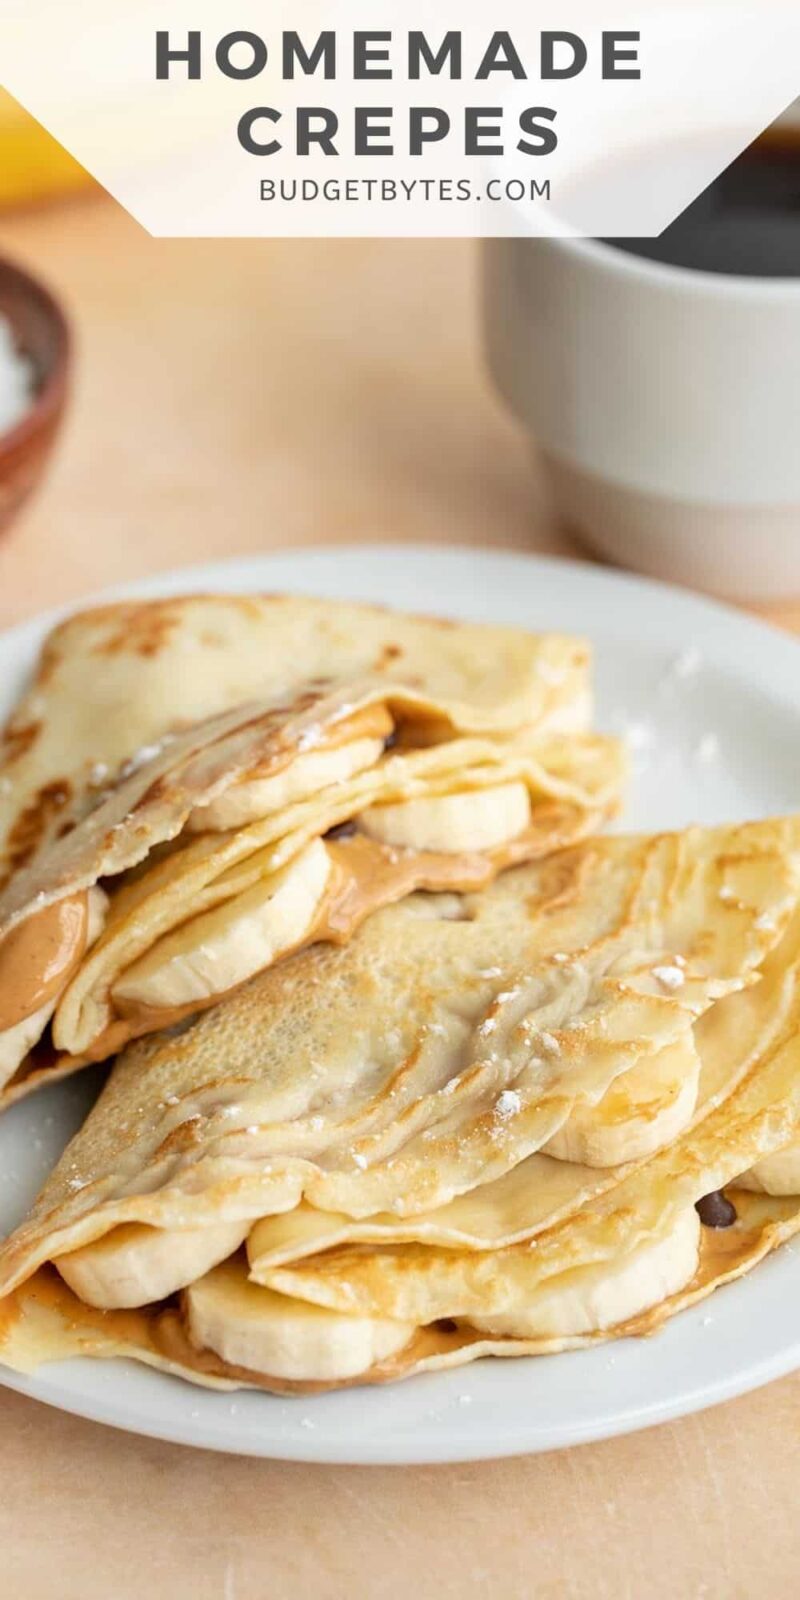 Two filled and folded crepes on a plate